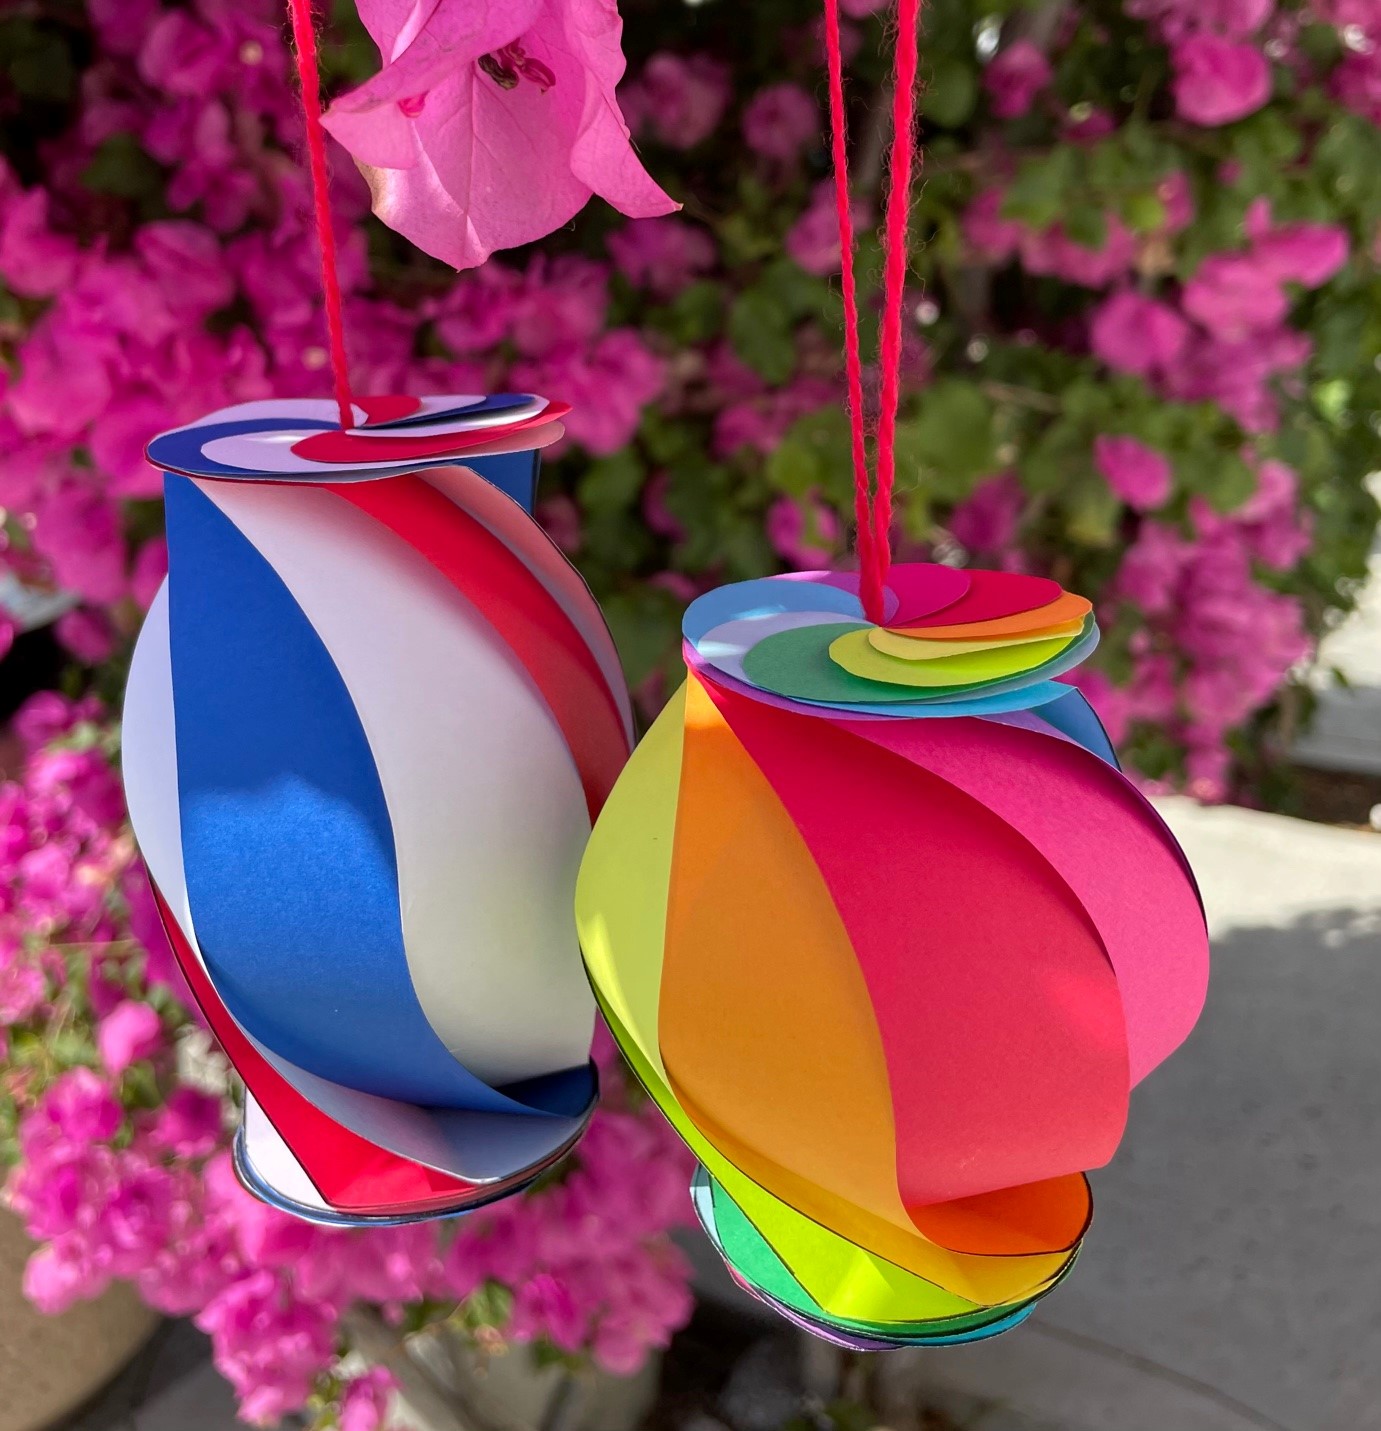 Colorful paper decorations, hanging from a tree